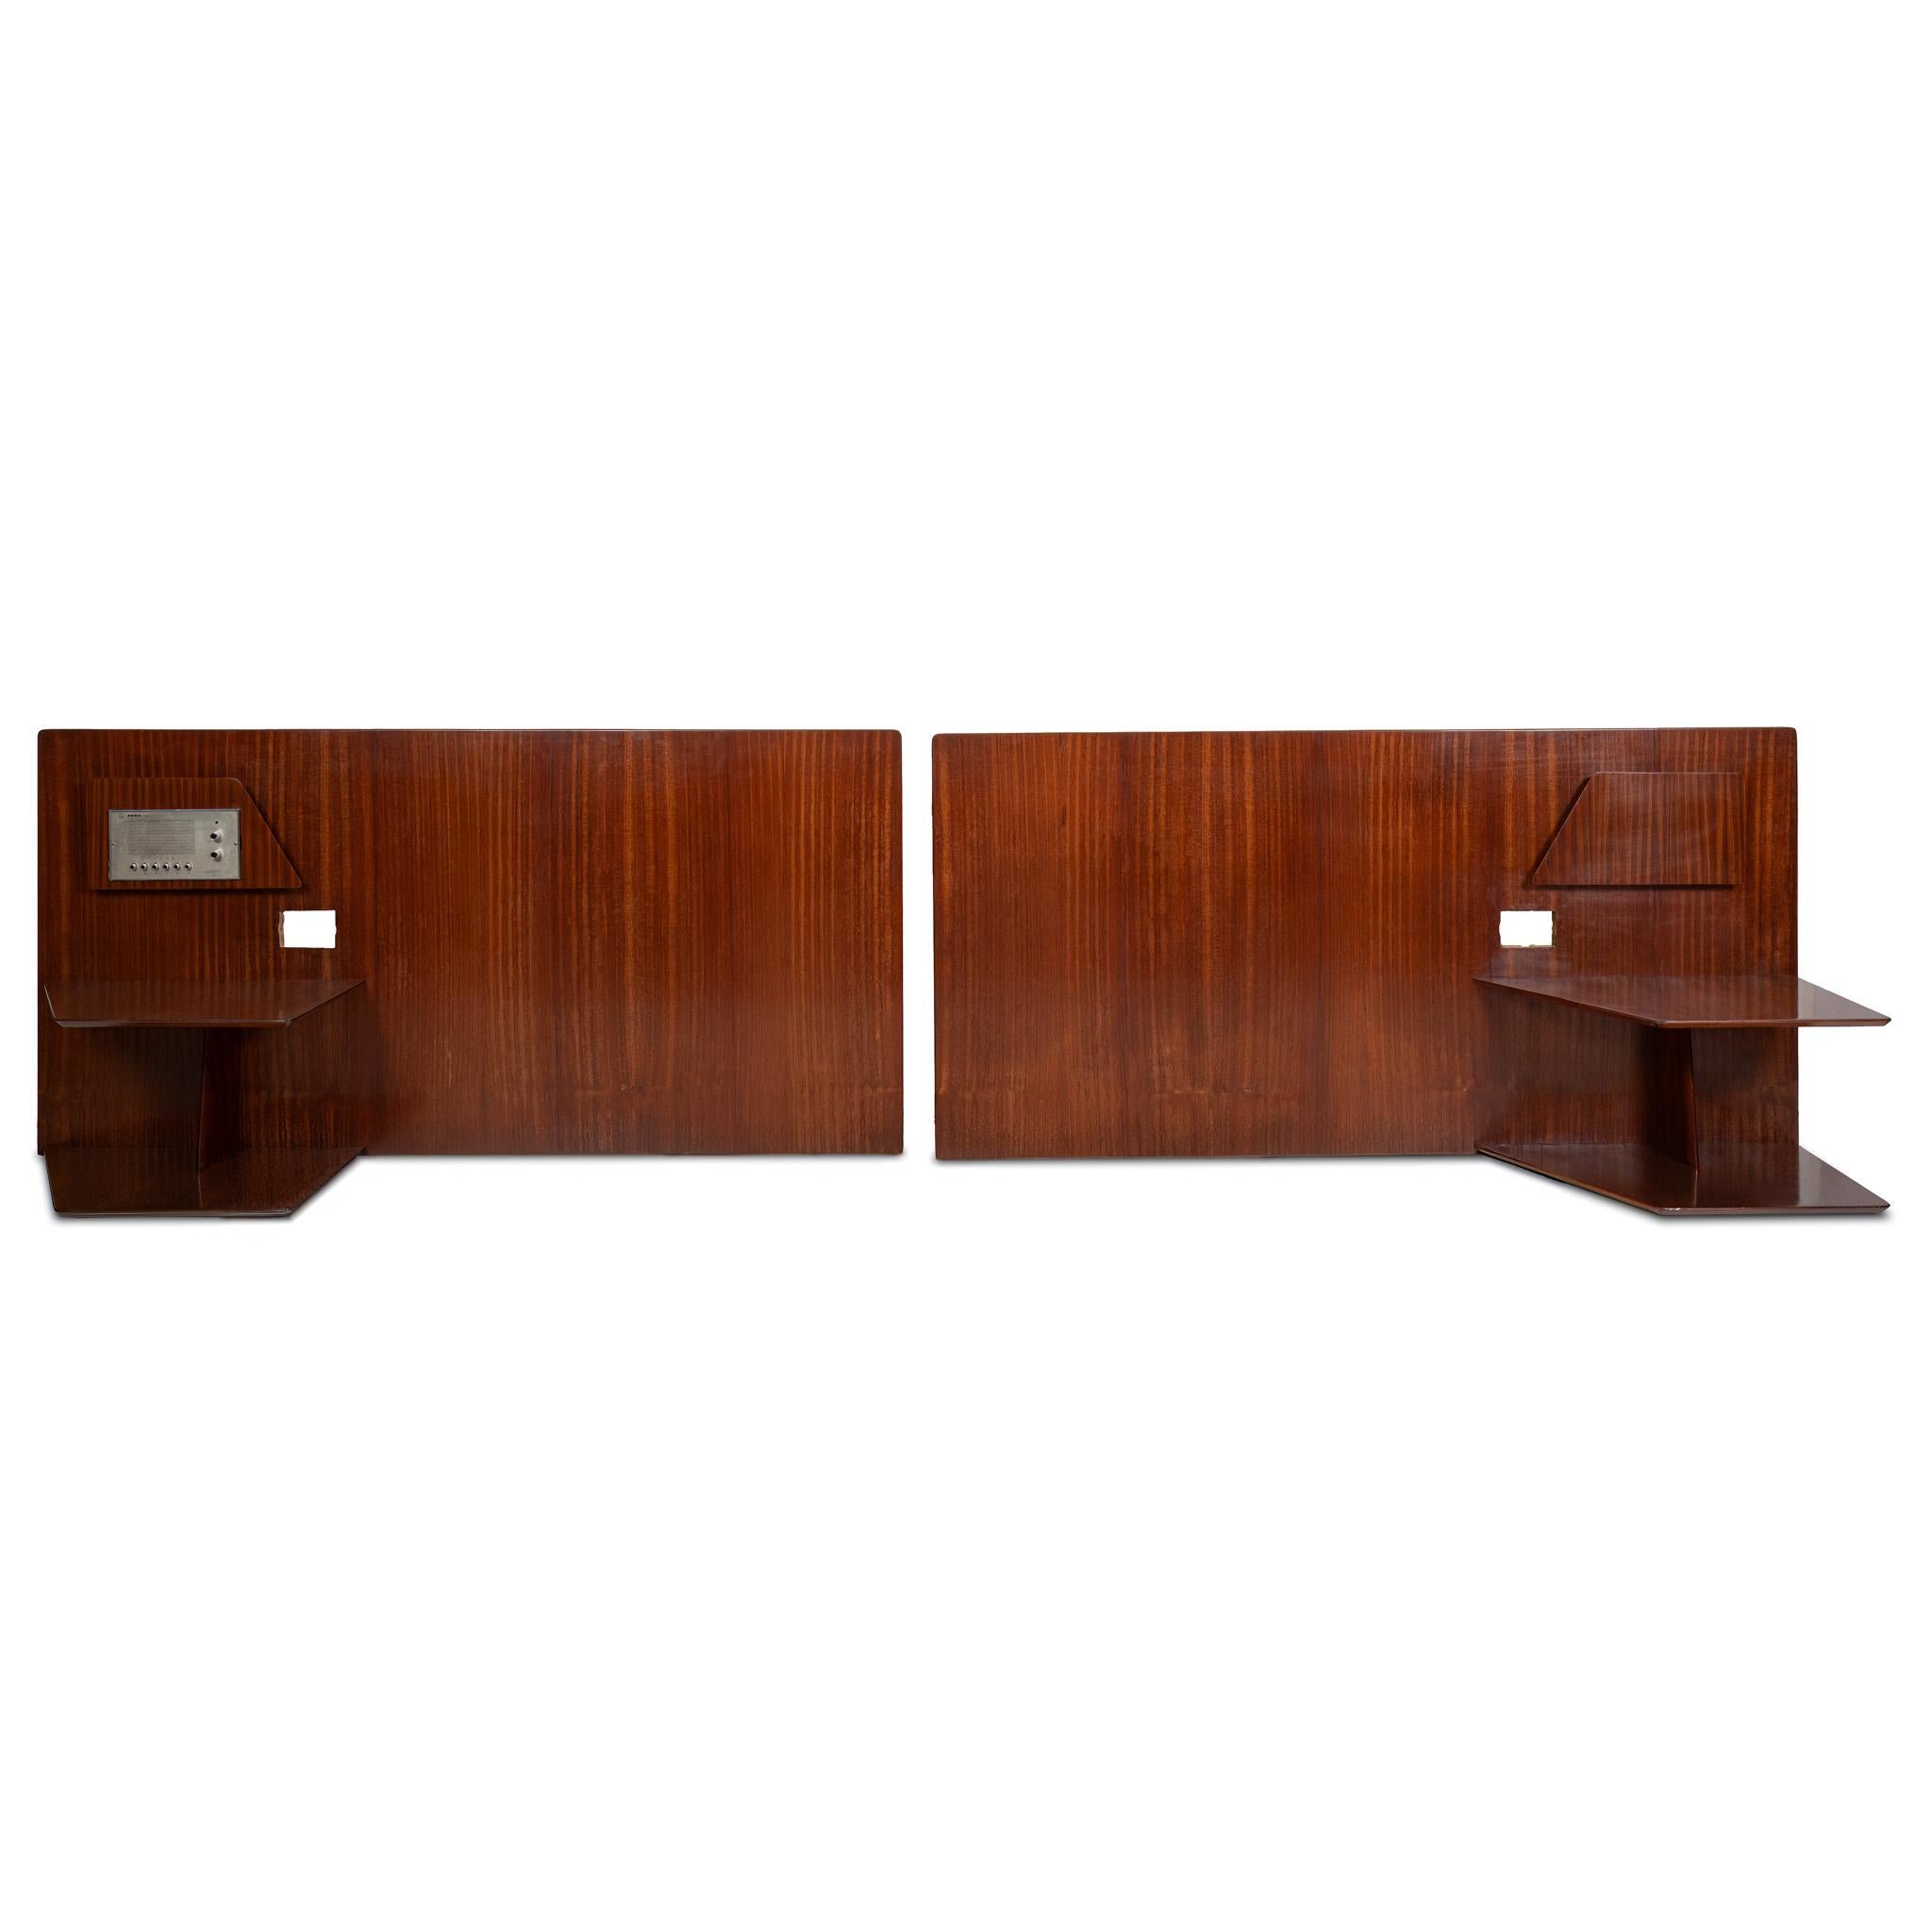 A pair of headboards by Gio Ponti from the furniture of the Hotel Royal in Naples, 1955.
Manufactured by Giordano Chiesa by Dassi.
walnut  and metal
two tiered shelving, magazine rack, space for lighting and two radio unit ( not working).
Good